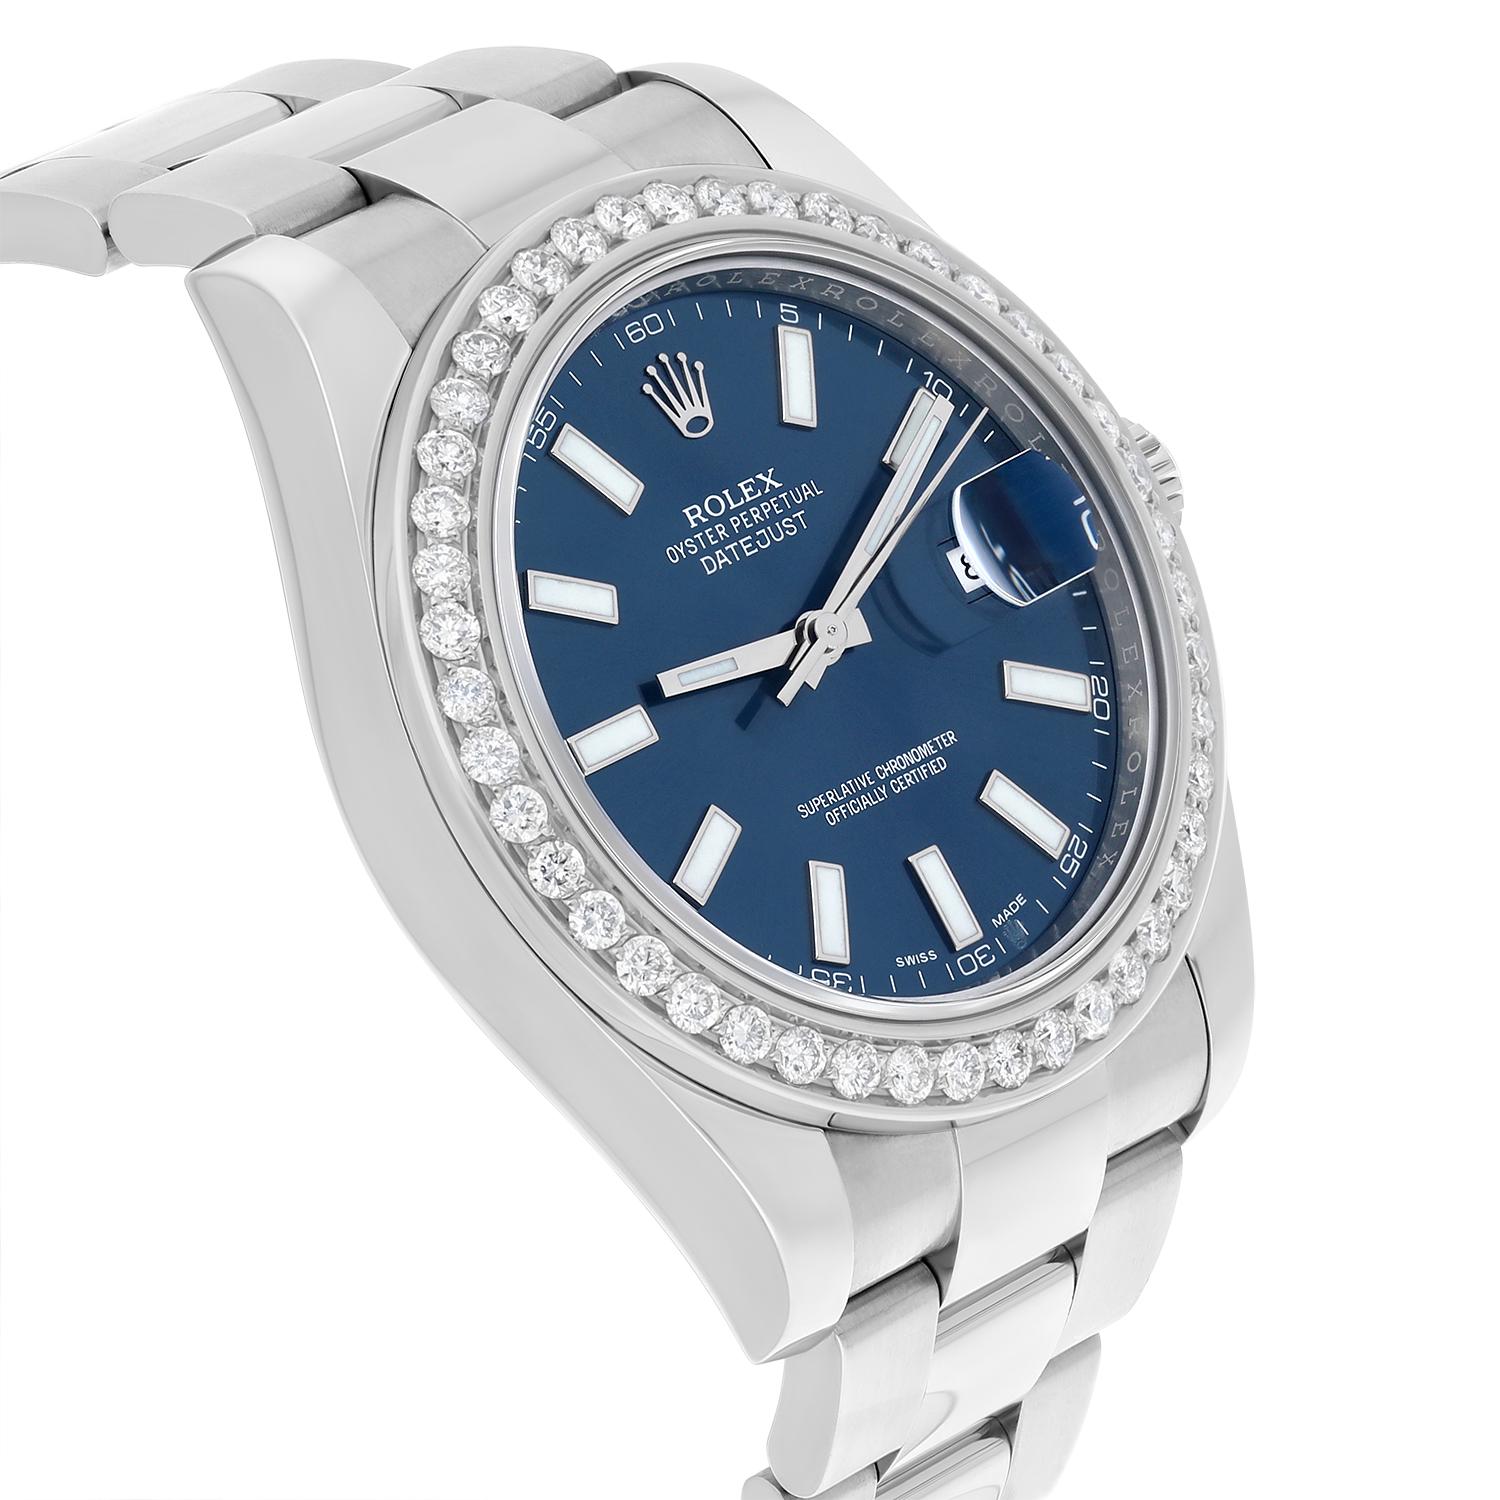 Rolex Datejust II 41mm Steel Blue Index Dial Diamond Bezel Watch Oyster 116334 In Excellent Condition For Sale In New York, NY